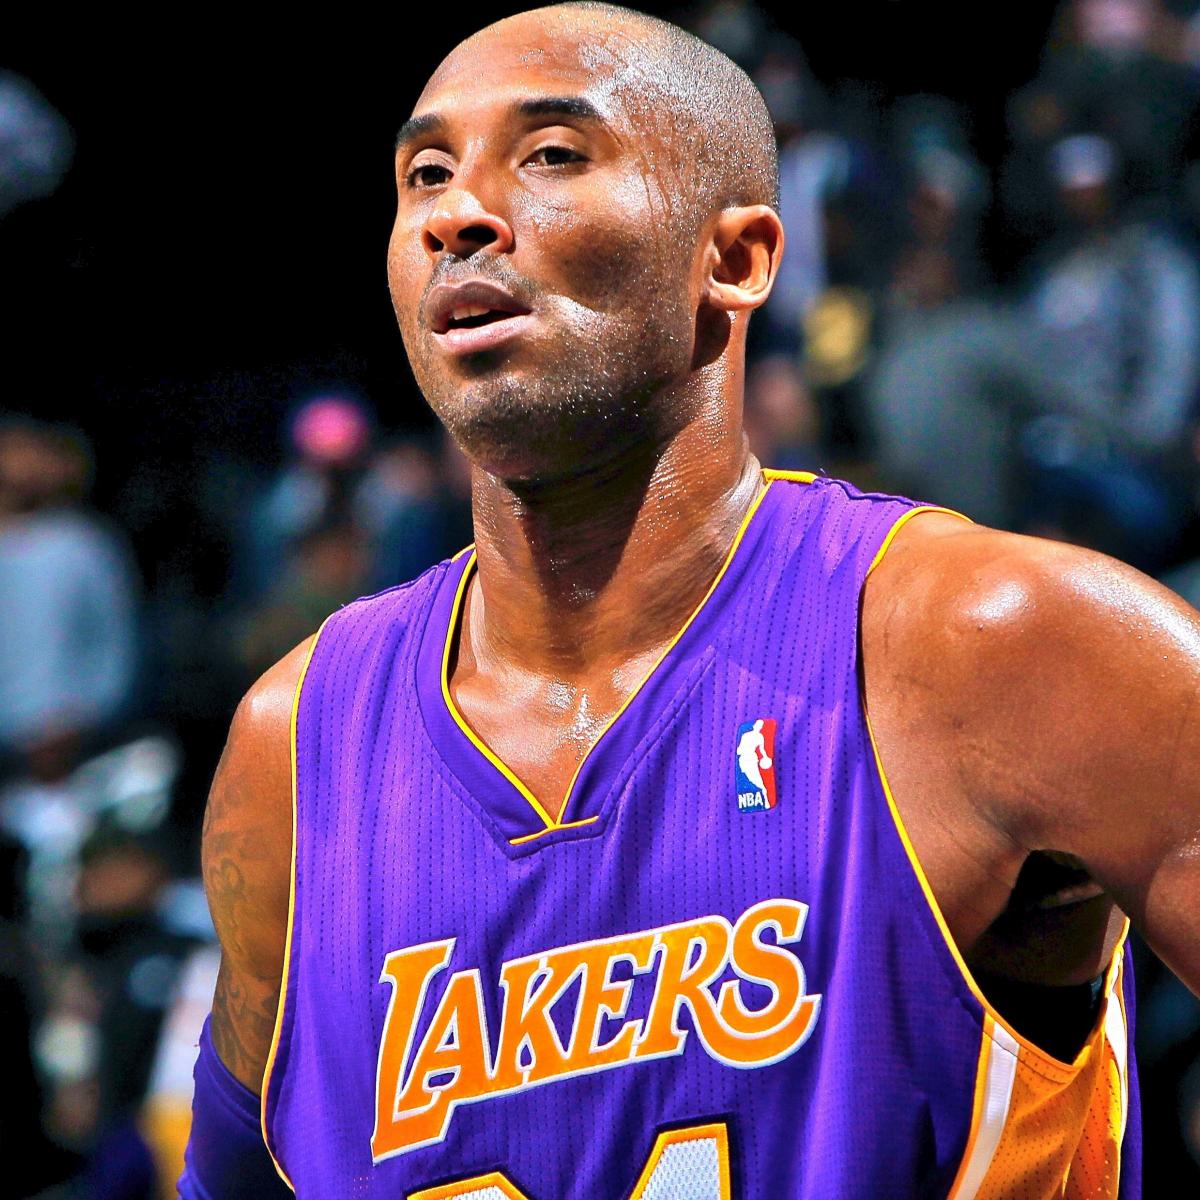 Kobe Bryant Injury Update: Lakers Star Out 6 Weeks with Fracture in Knee | Bleacher Report